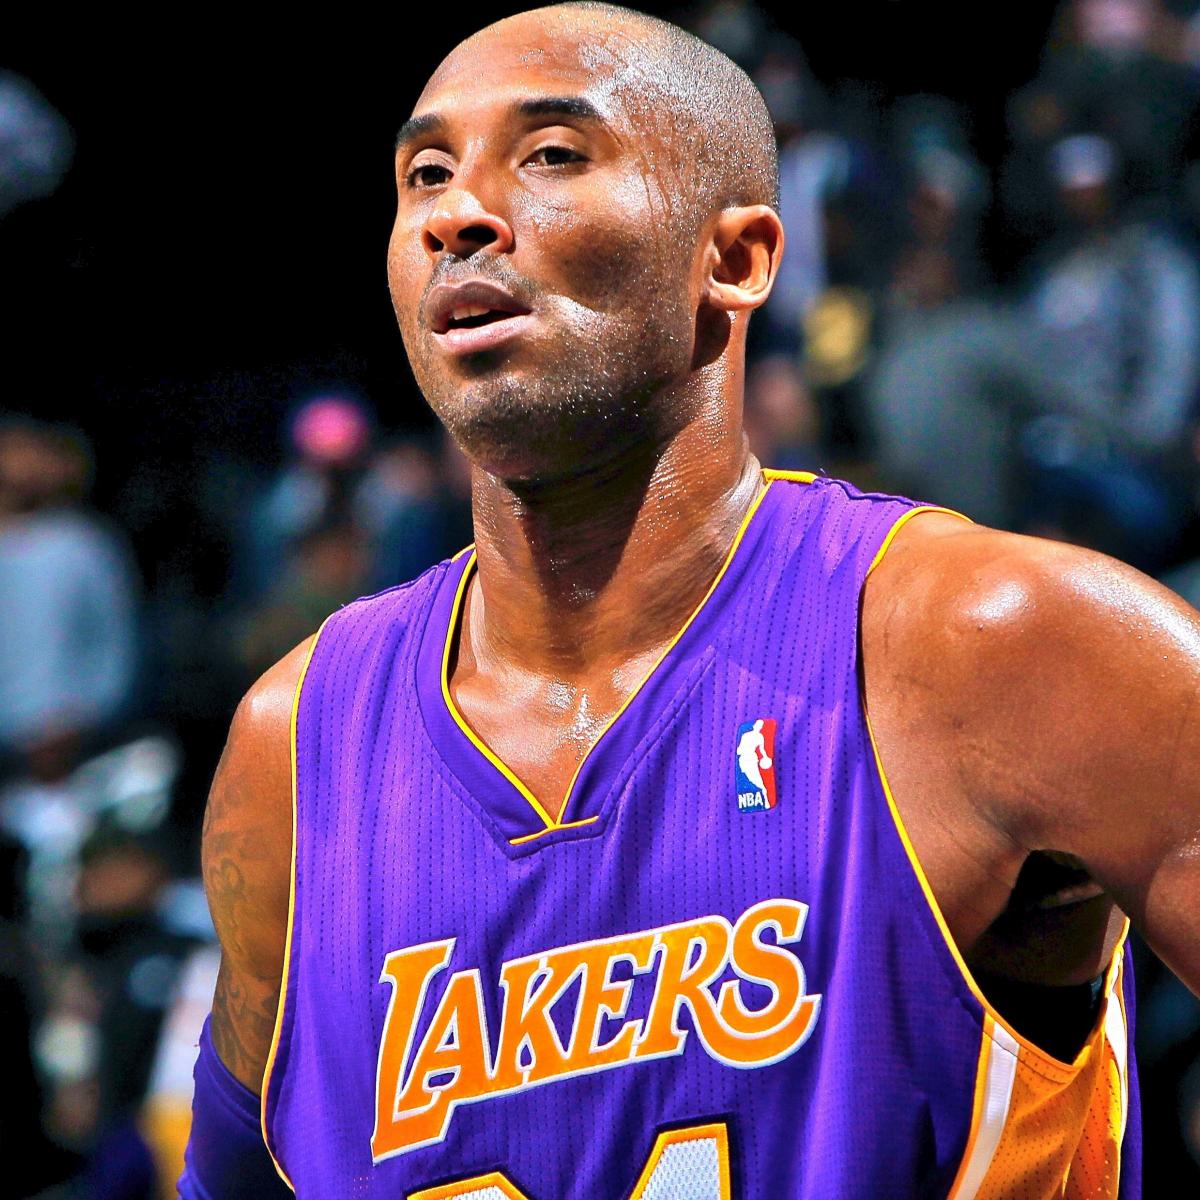 Kobe Bryant Injury Update: Lakers Star Out 6 Weeks with Fracture in Knee | Bleacher Report